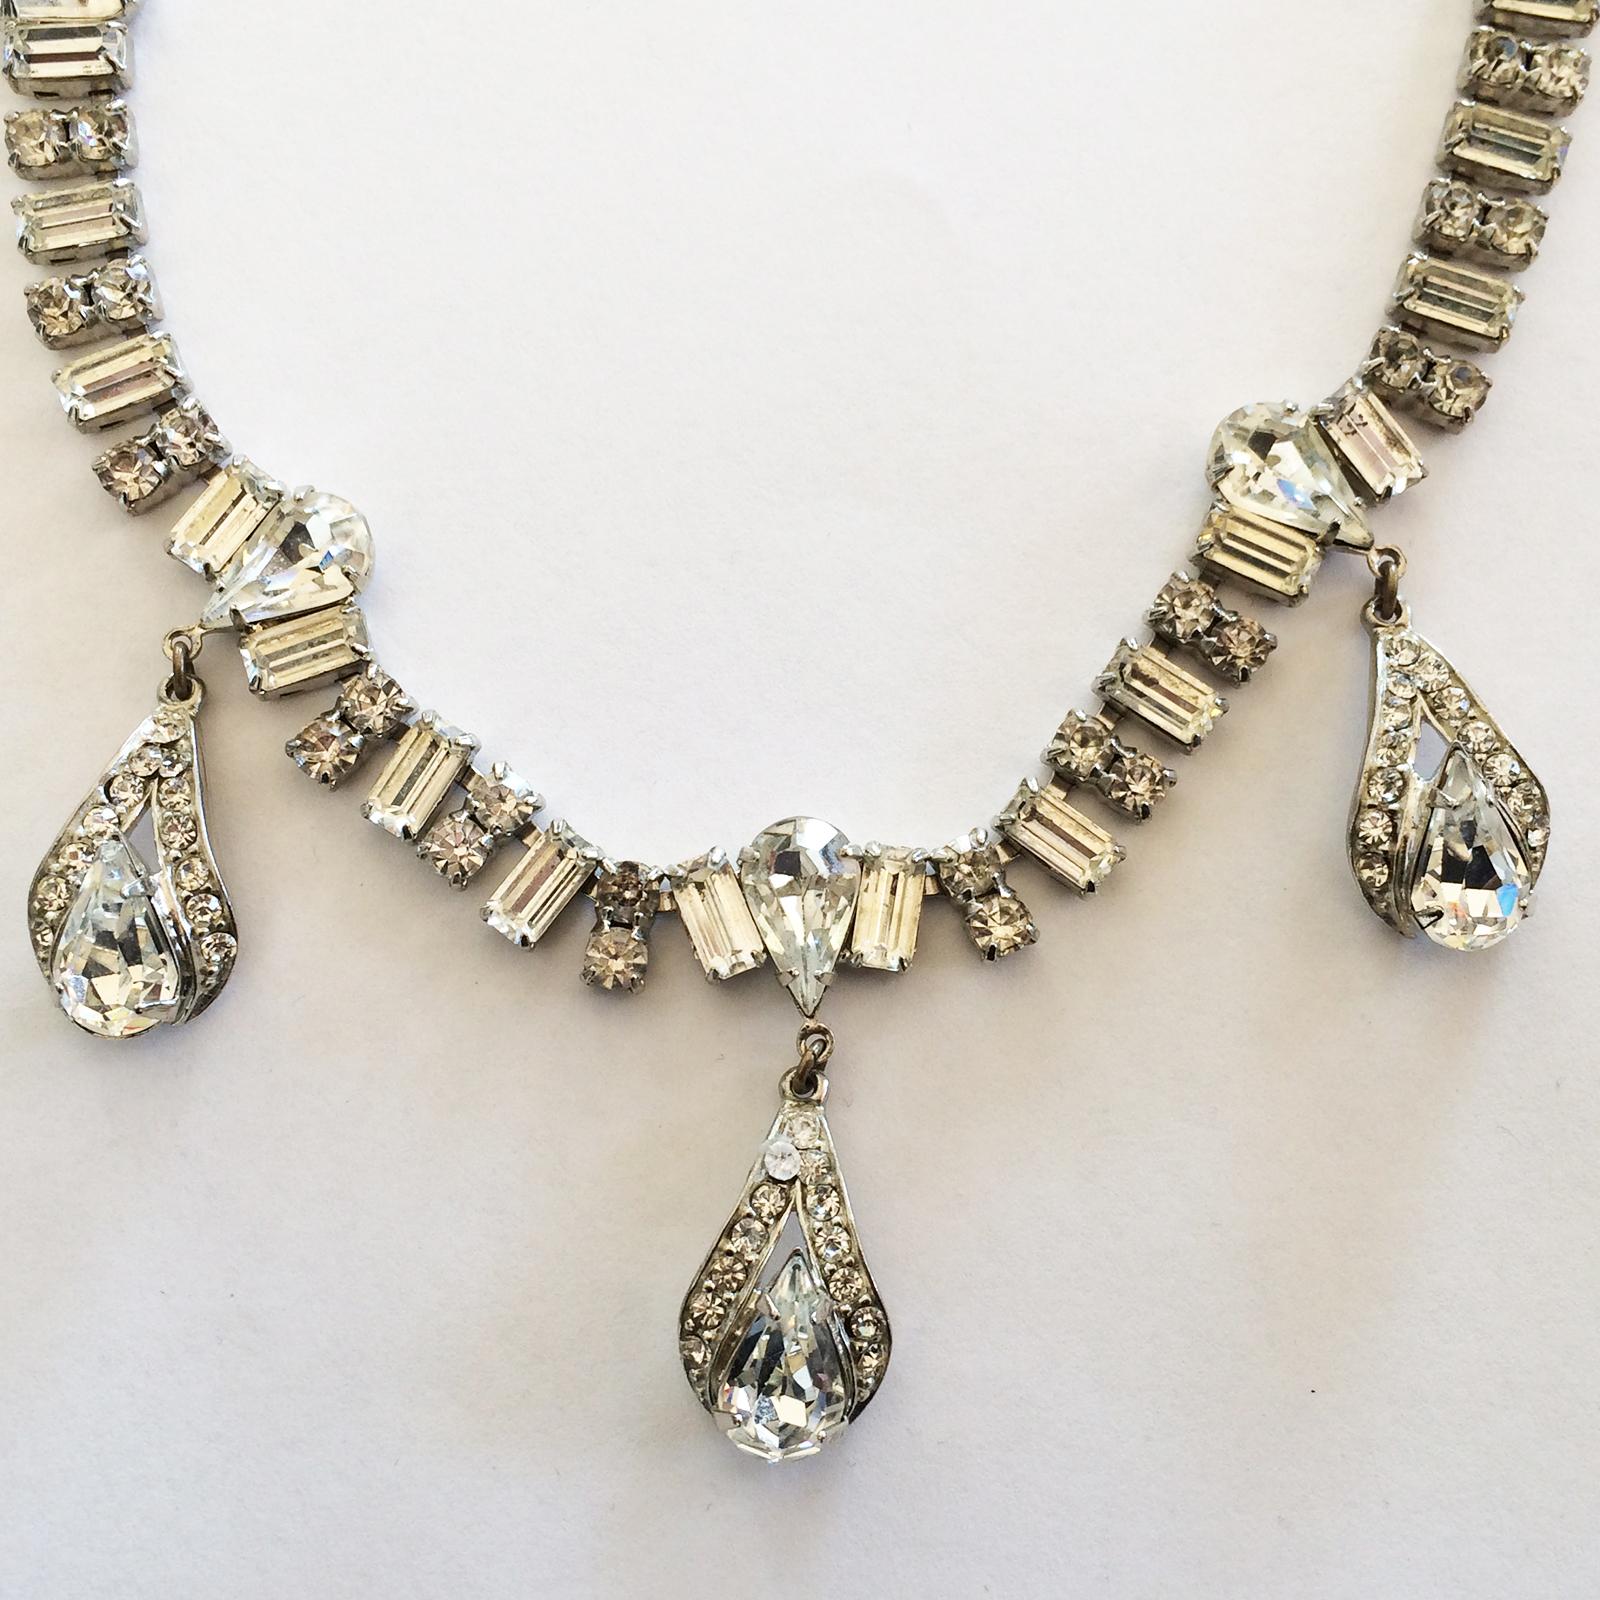 Art Deco, Fine Necklace in Rhinestones, with a Triple pendant design and adjustable clasp. Extremely well set with variations of double Rhinestones, separated by Baguette Cut stones between links; the Pendants have a perfect “Tear Drop” gem,